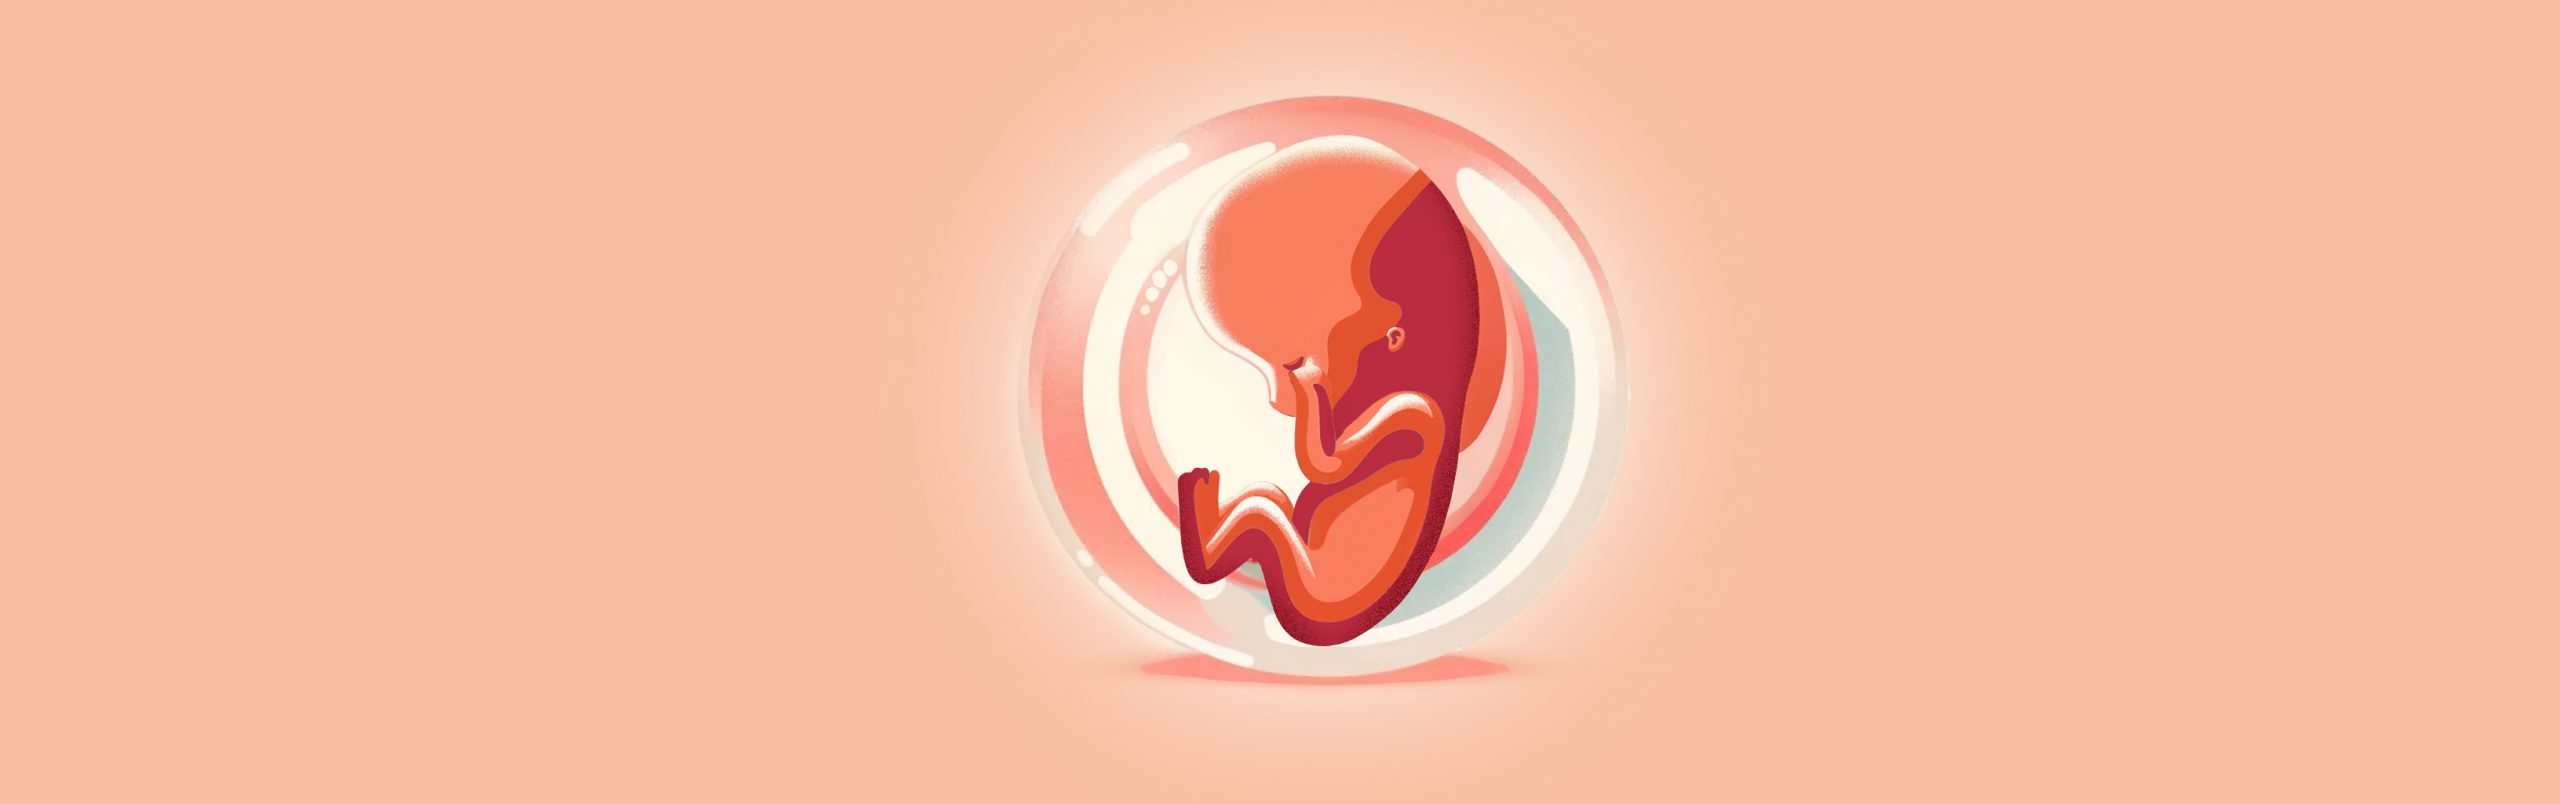 Graphic of Week 8 of pregnancy. An illustration of a baby at week 8 in the gestational sac.